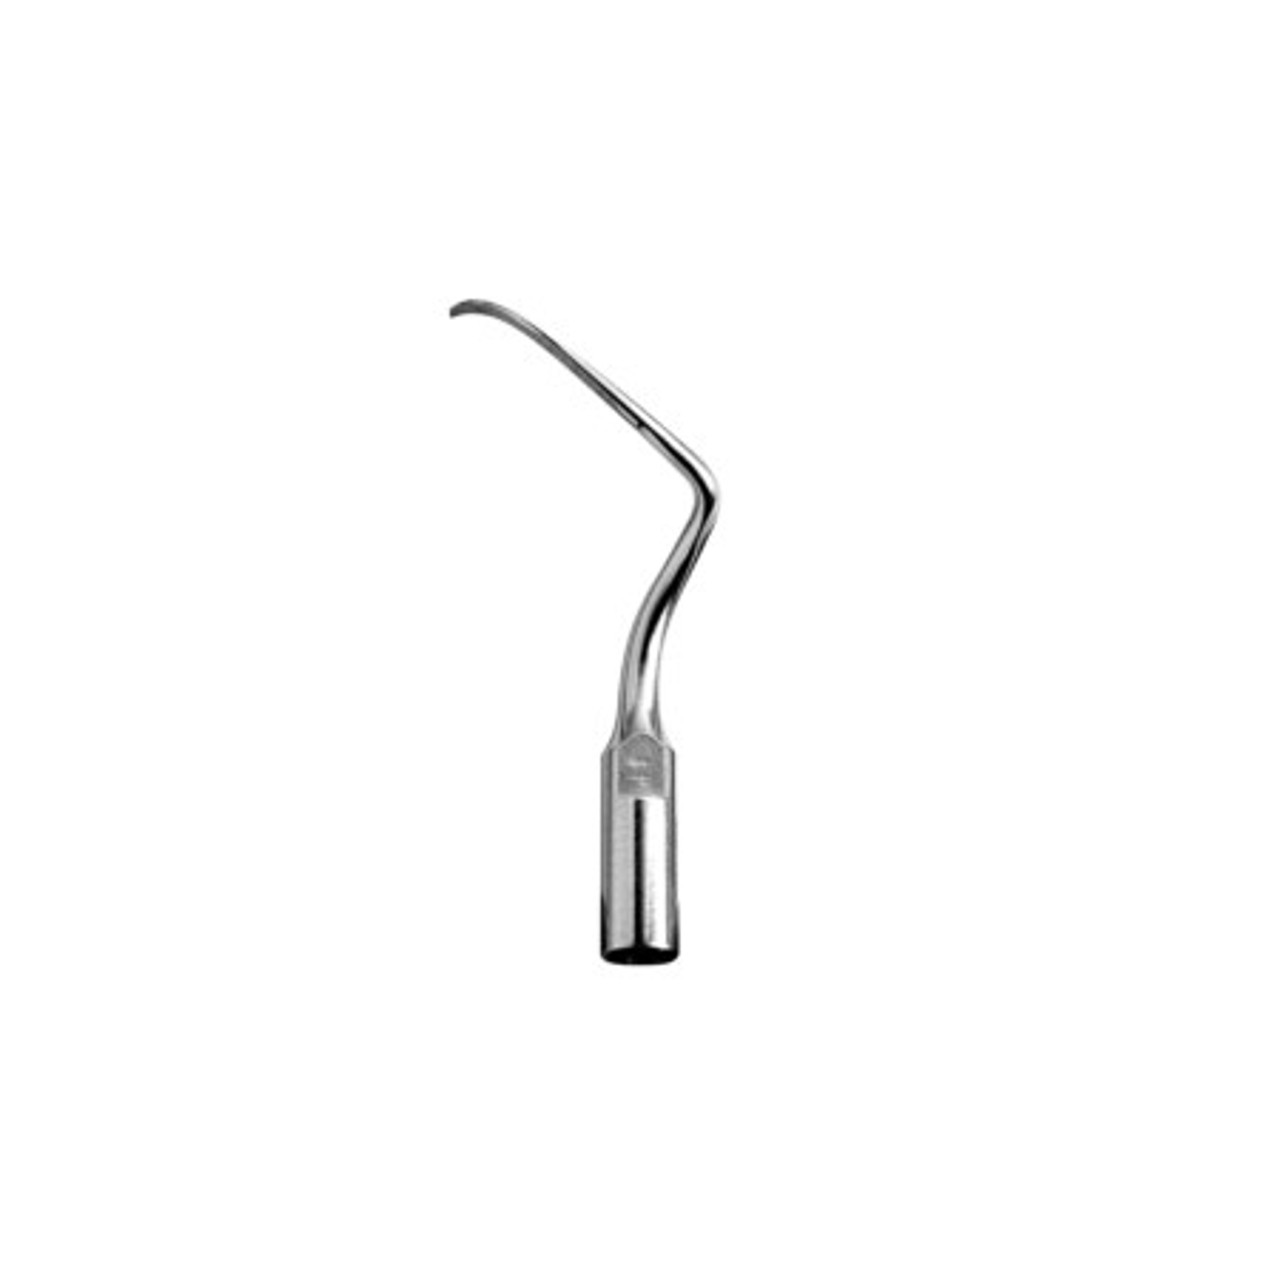 Standard diameter contra-angle tip used to remove calculus on all surfaces of premolars and molars, especially difficult to reach interproximal surfaces.